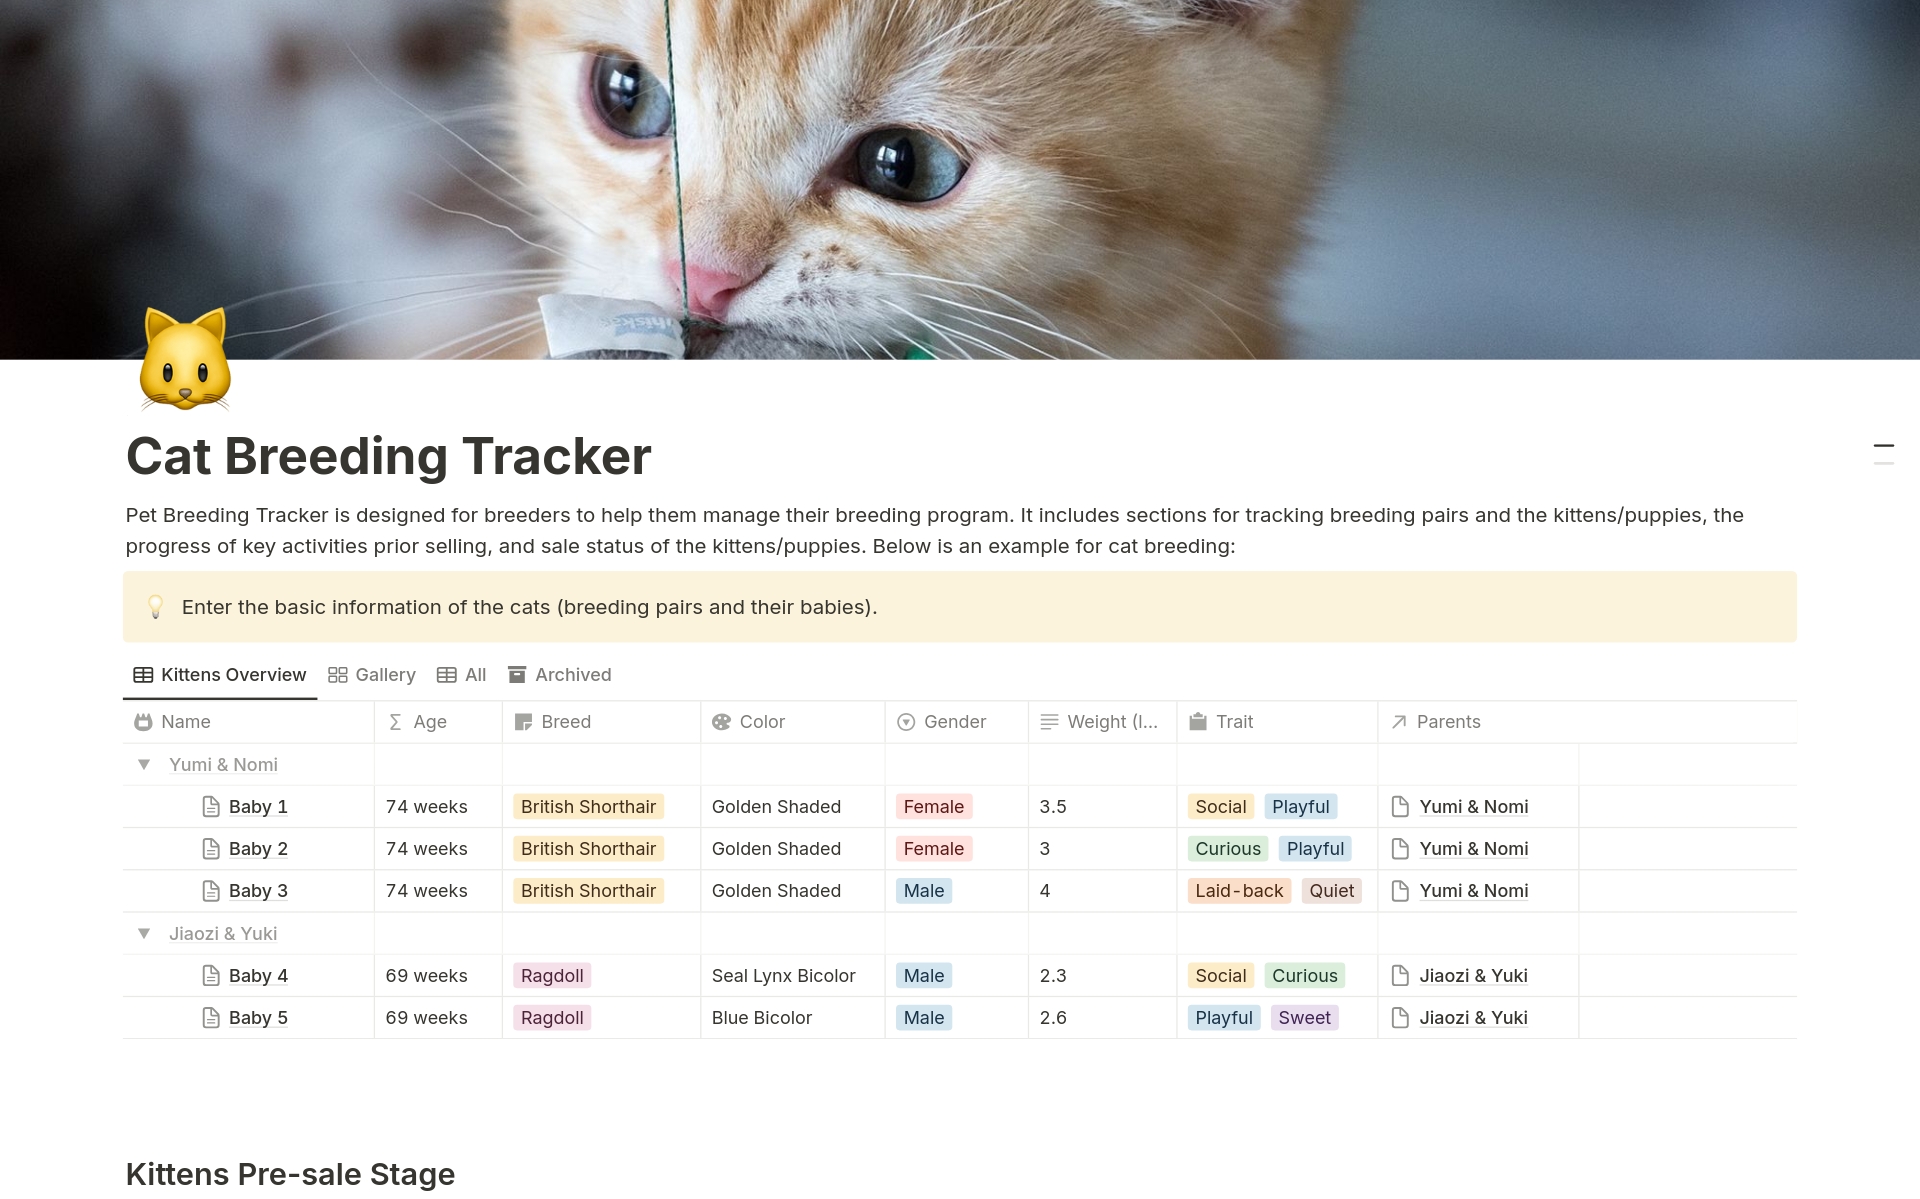 Pet Breeding Tracker is designed for breeders to help them manage their breeding program. It includes sections for tracking breeding pairs and the kittens/puppies, the progress of key activities prior selling, and sale status of the kittens/puppies.